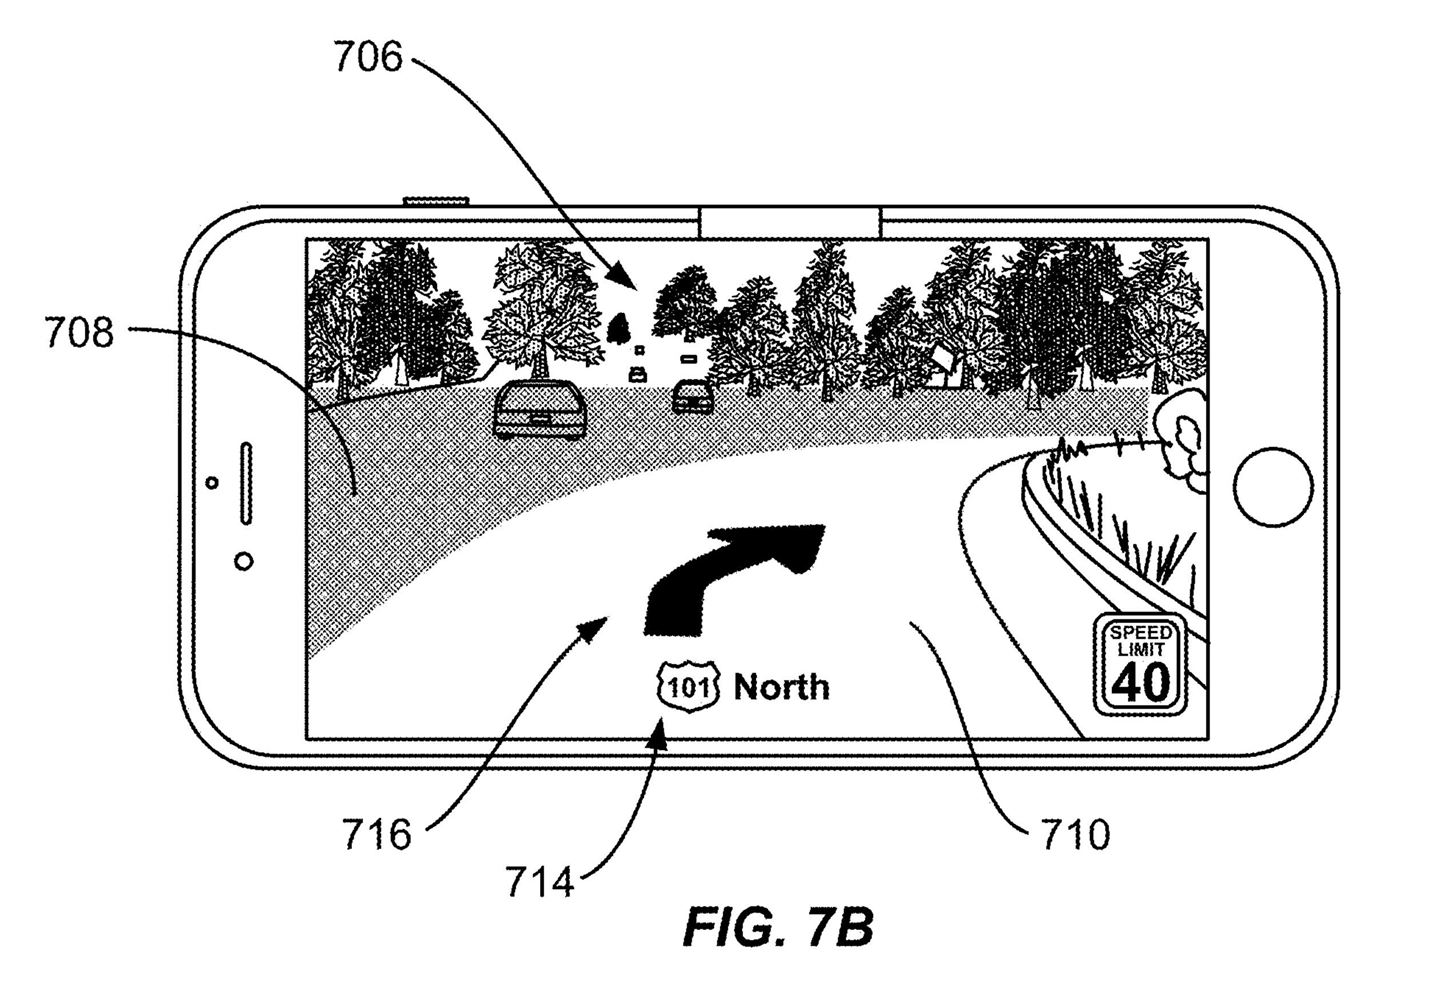 Apple's Latest Patent Proposes Augmented Reality Navigation for Cars via Mobile Device